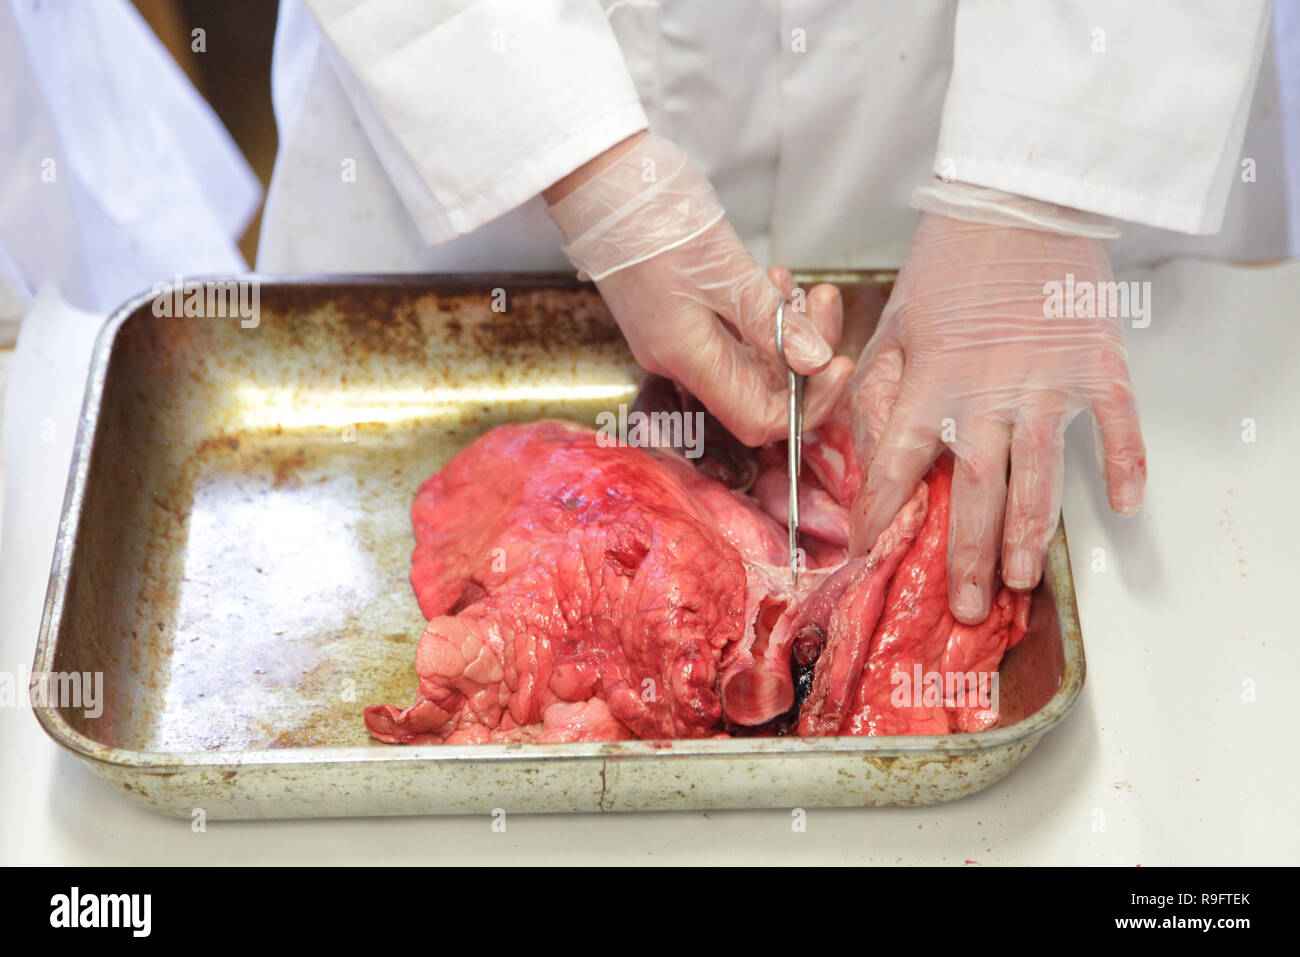 A biology teacher cuts up a lung in a metal tray using dissection scissors. Stock Photo